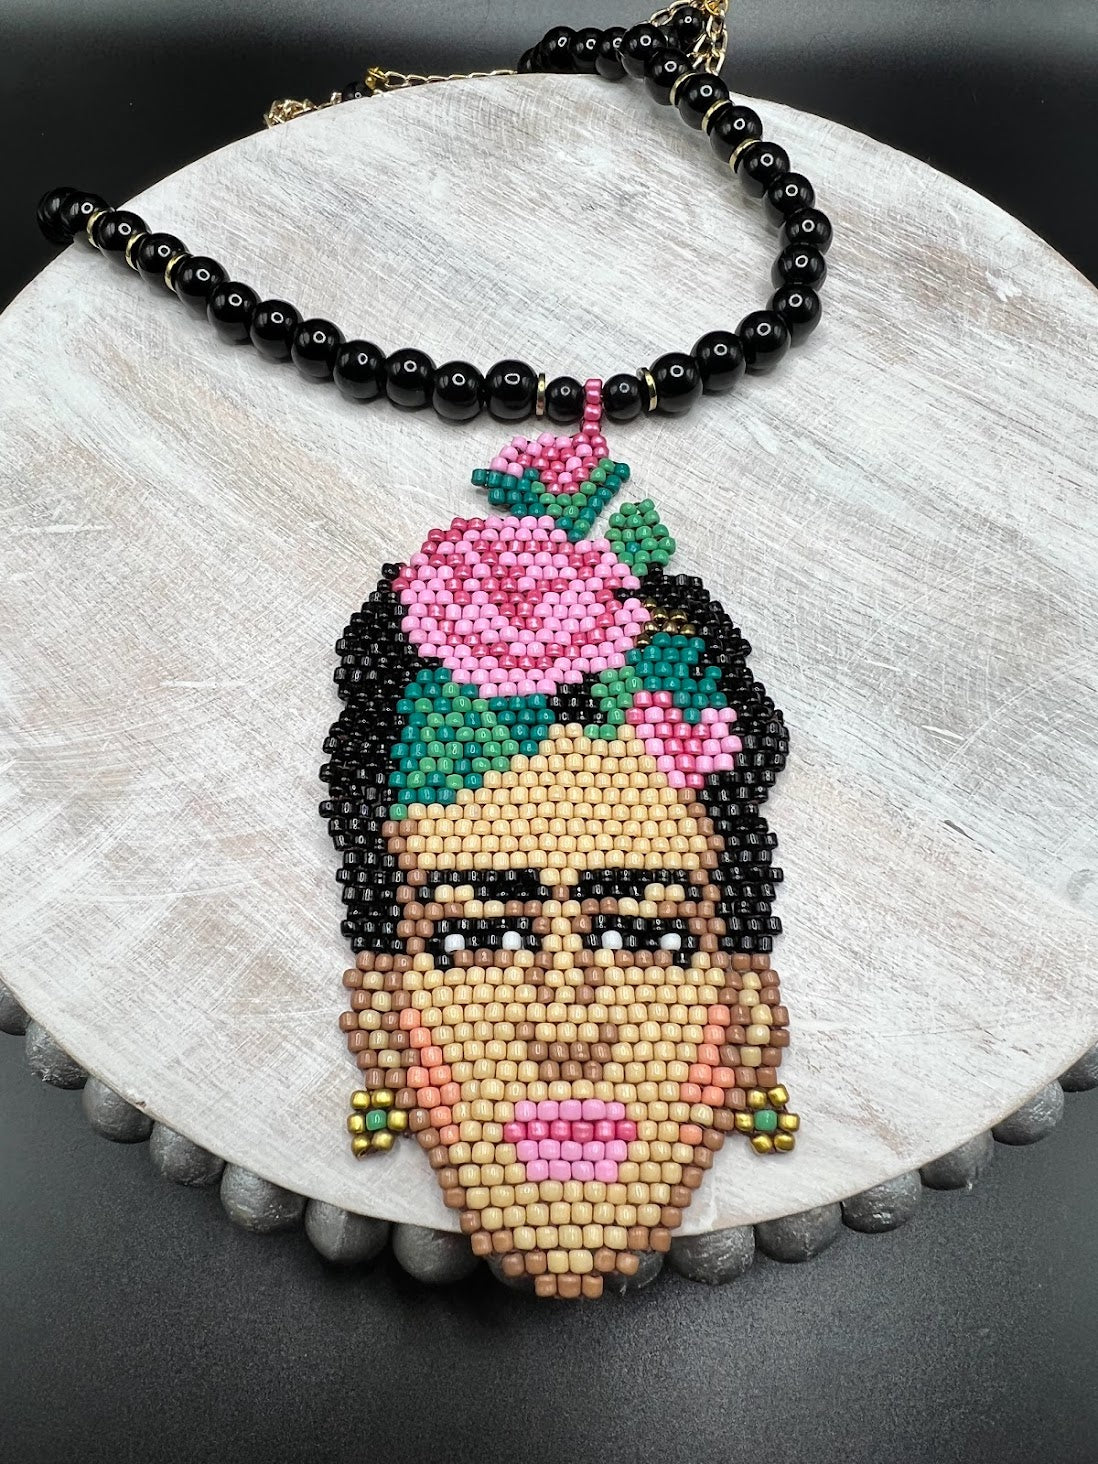 Frida Kahlo Face Pendant Necklace with Loom Bead